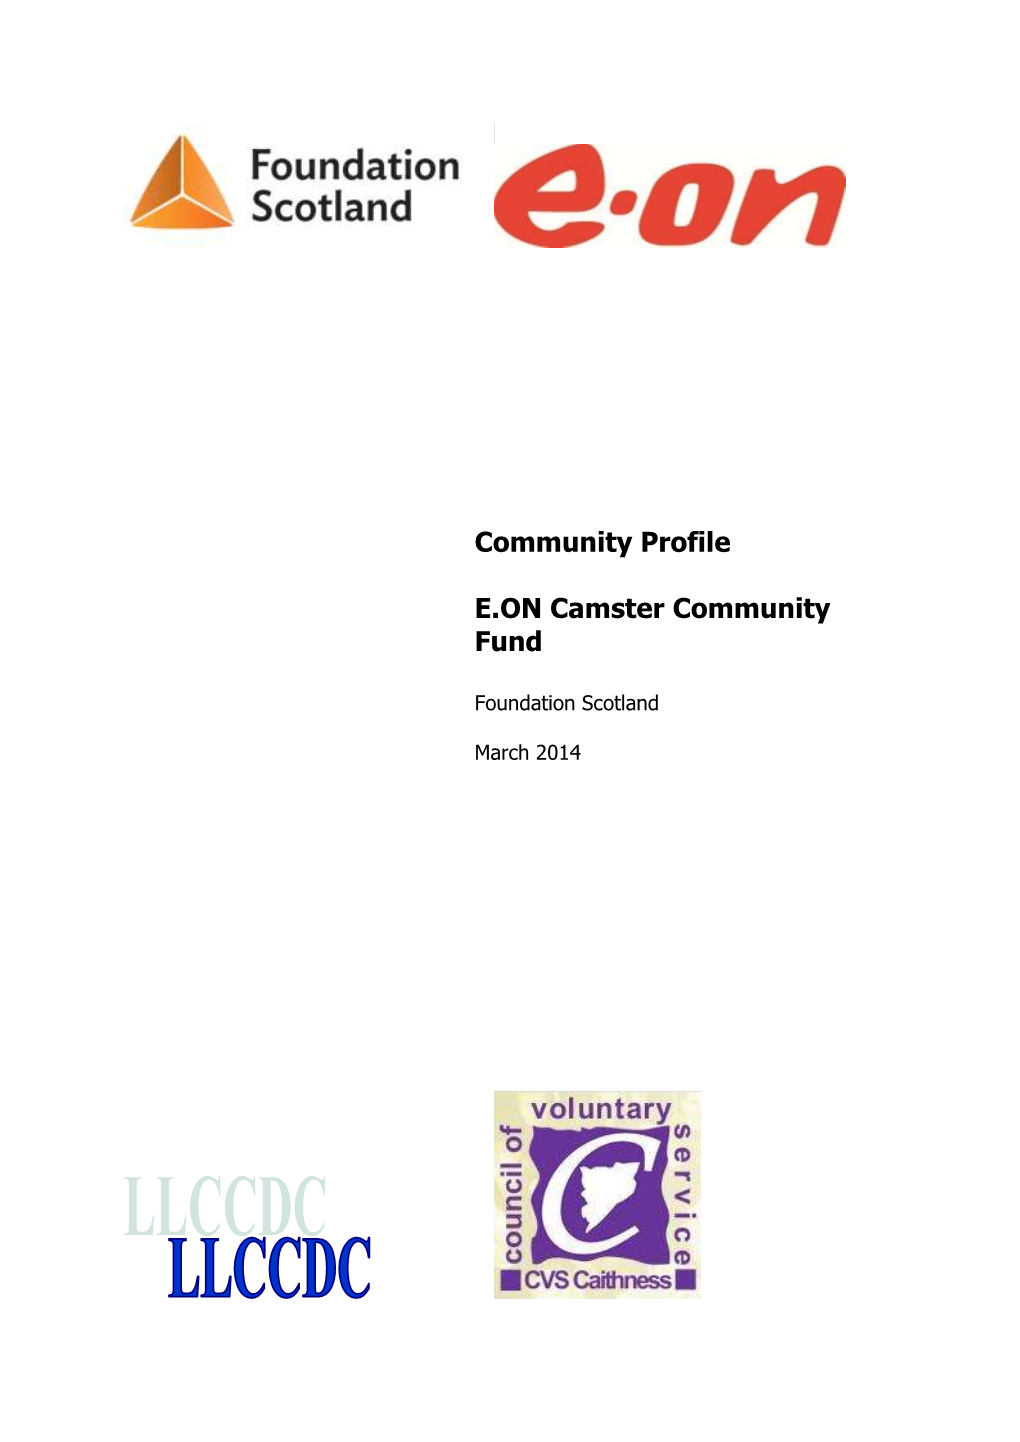 Community Profile E.ON Camster Community Fund